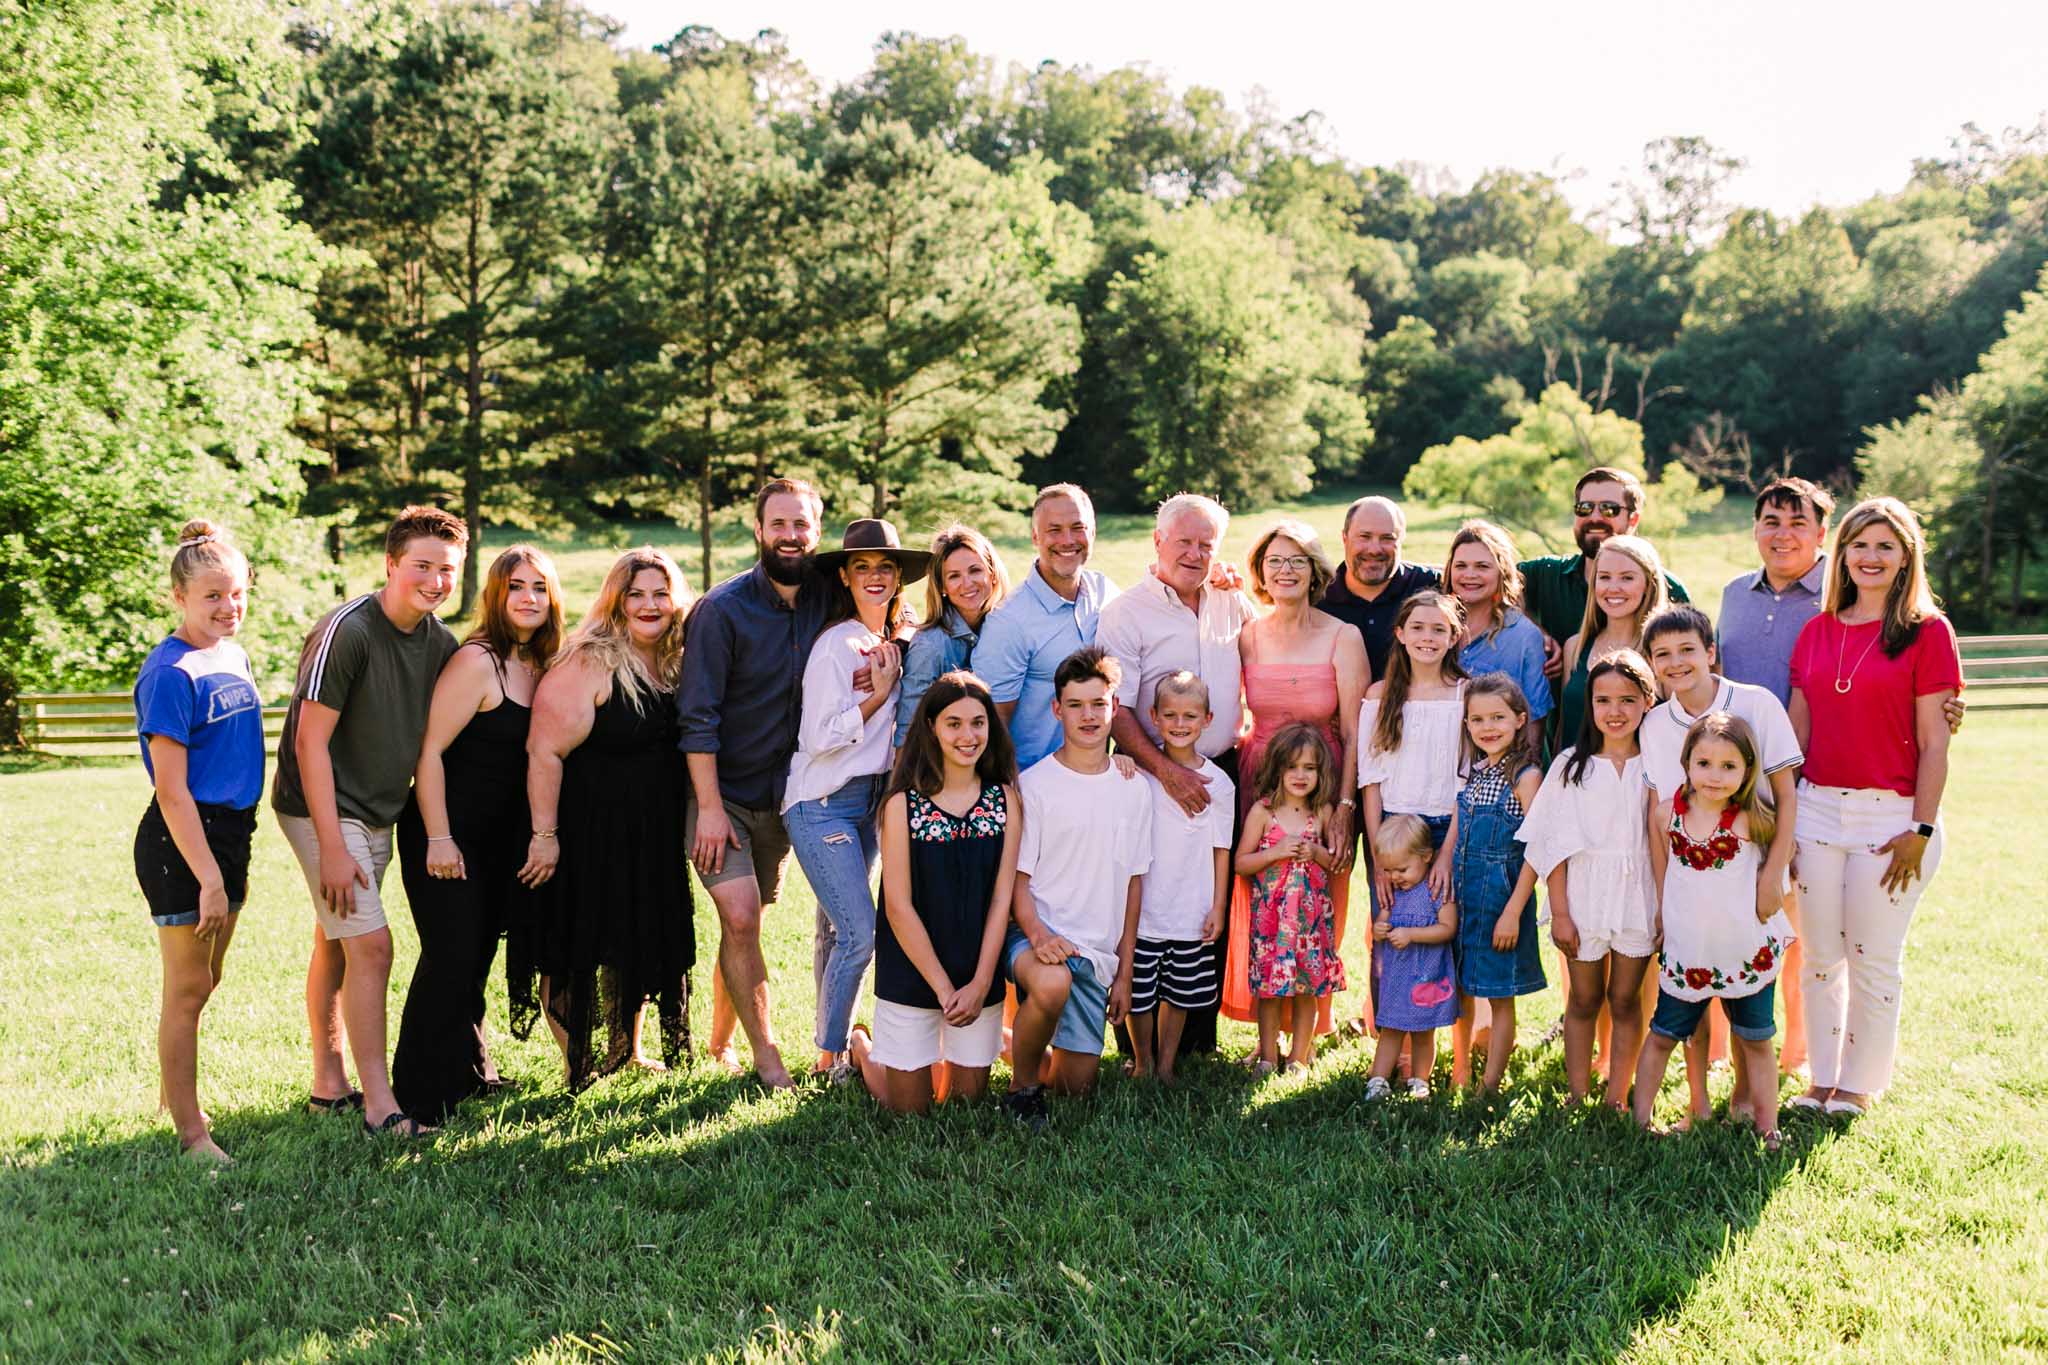 Durham Family Photographer | By G. Lin Photography | Group outdoor photo in open field